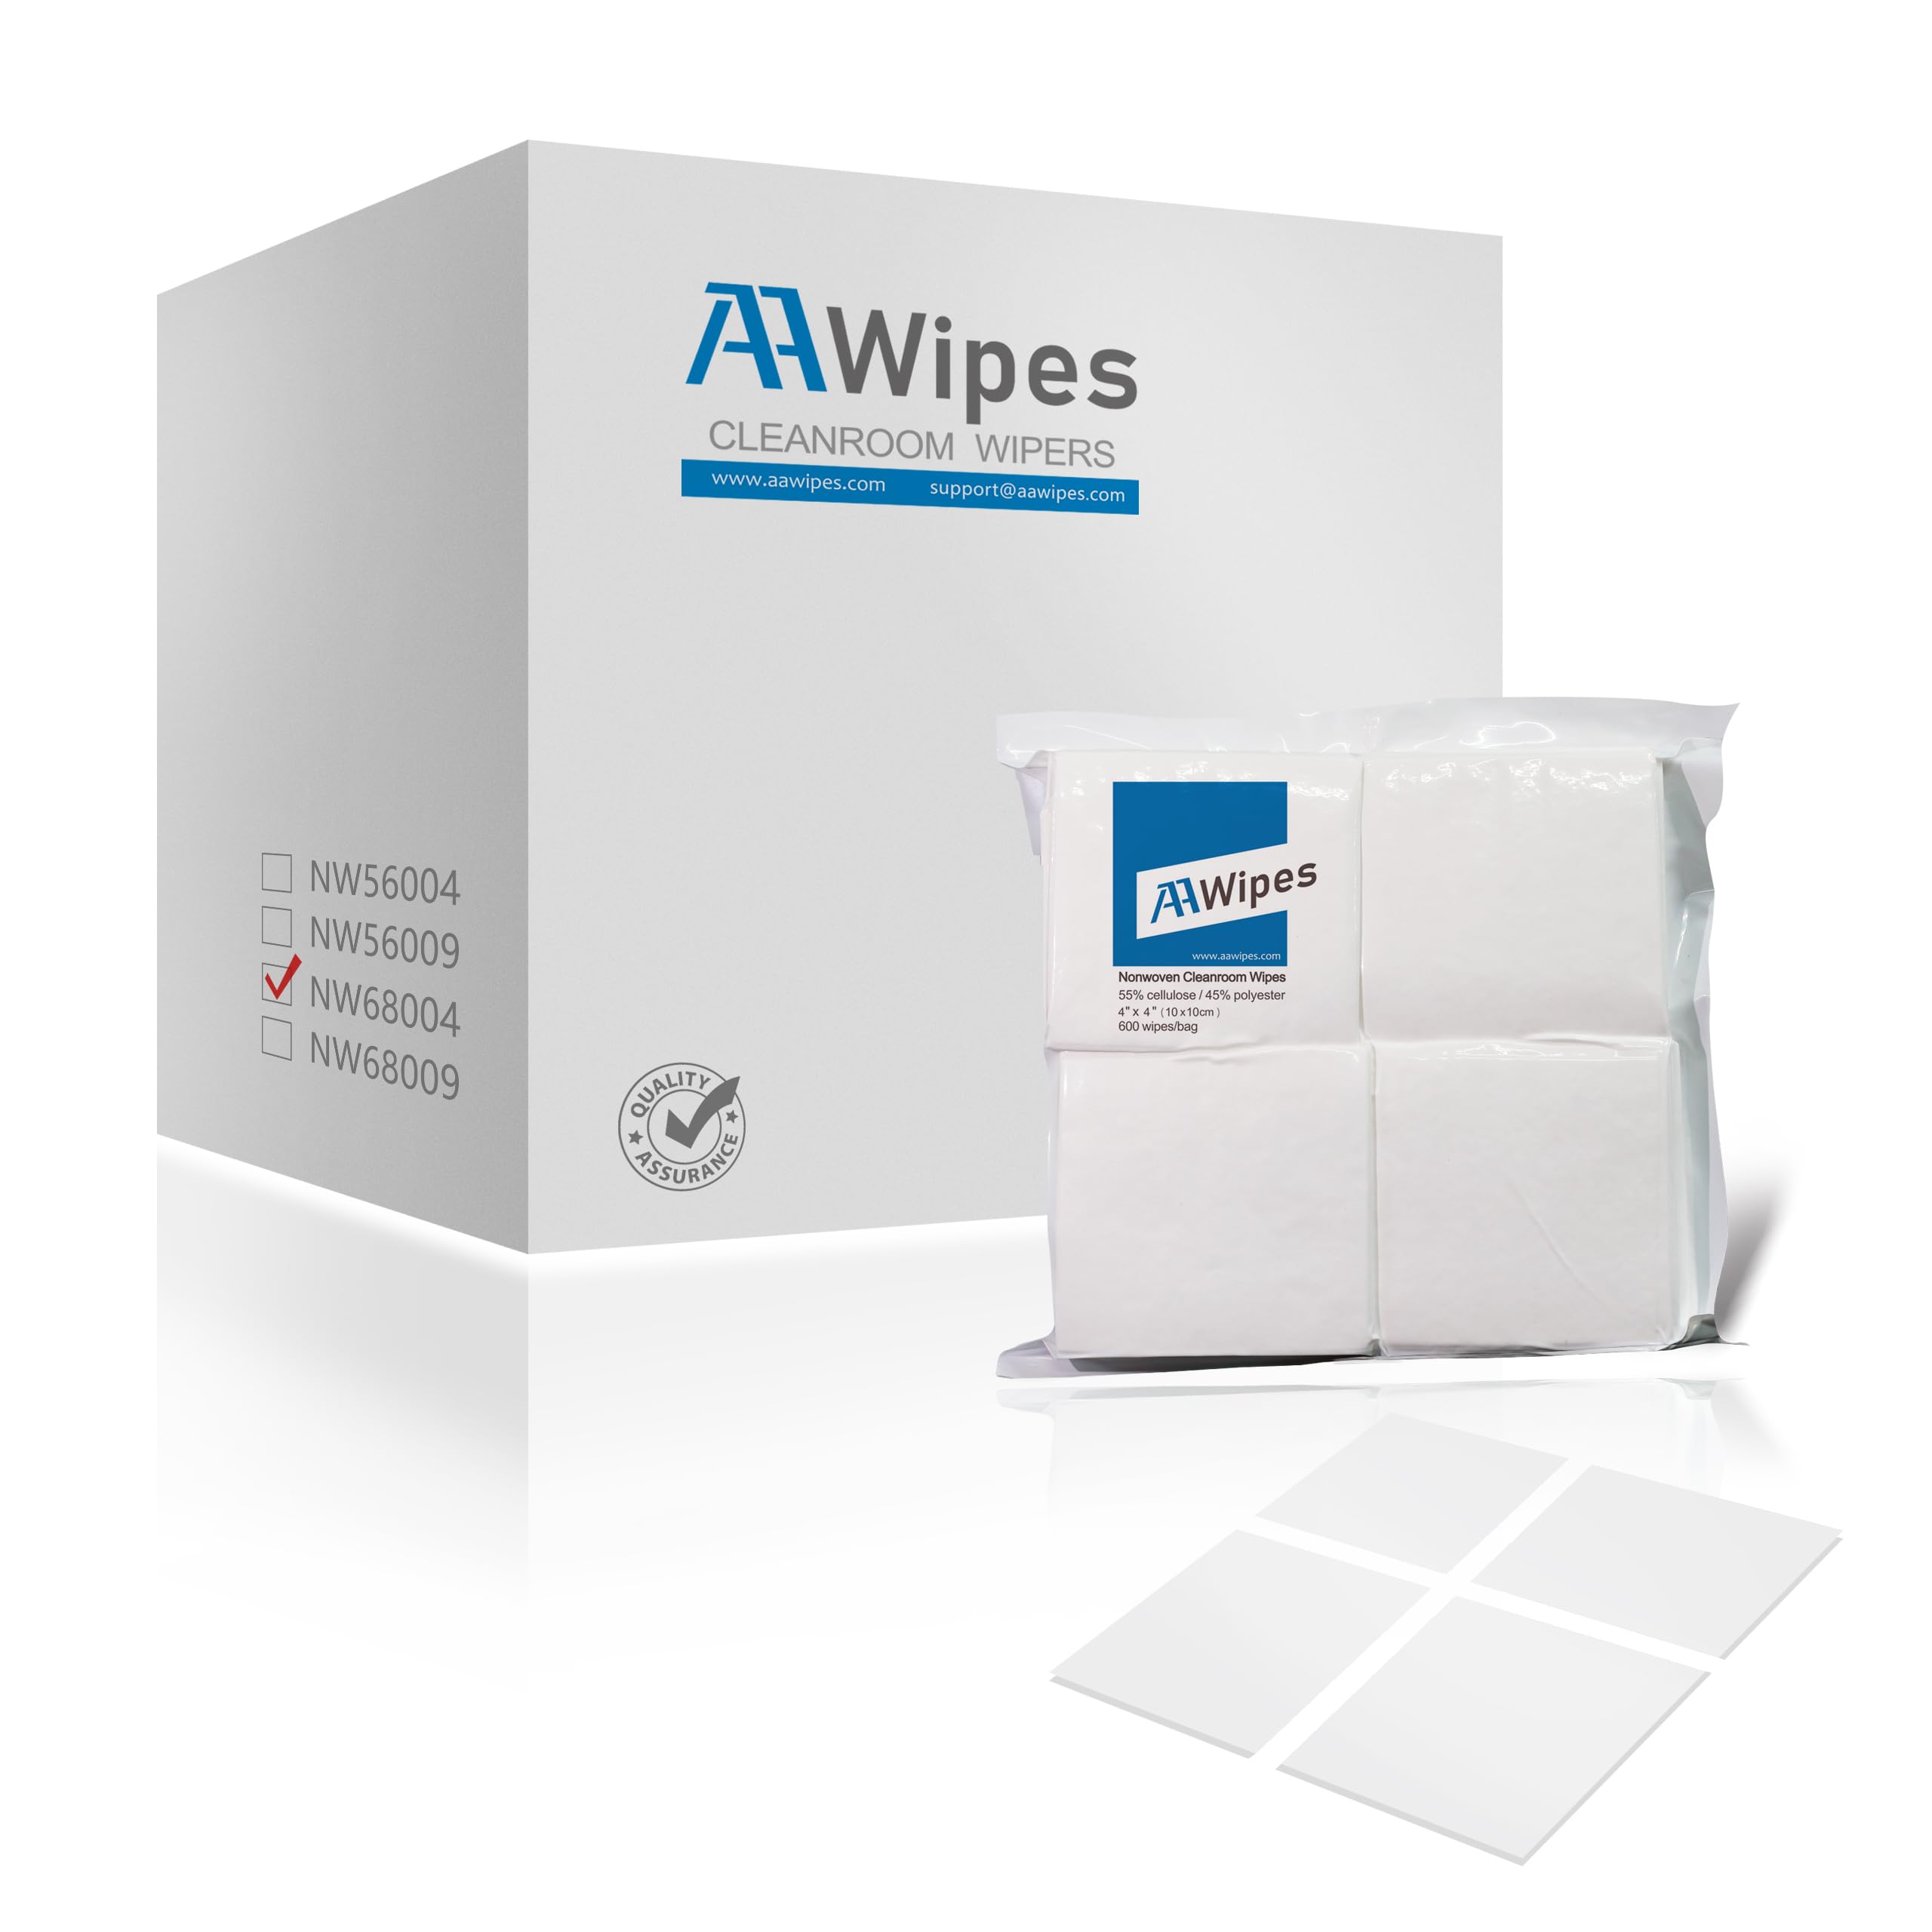 Nonwoven Wipes, Cellulose/Polyester Blend, 4" x 4" (Starting at 1 Box 16,800 Wipes per 28 Bags) (No. NW06804)